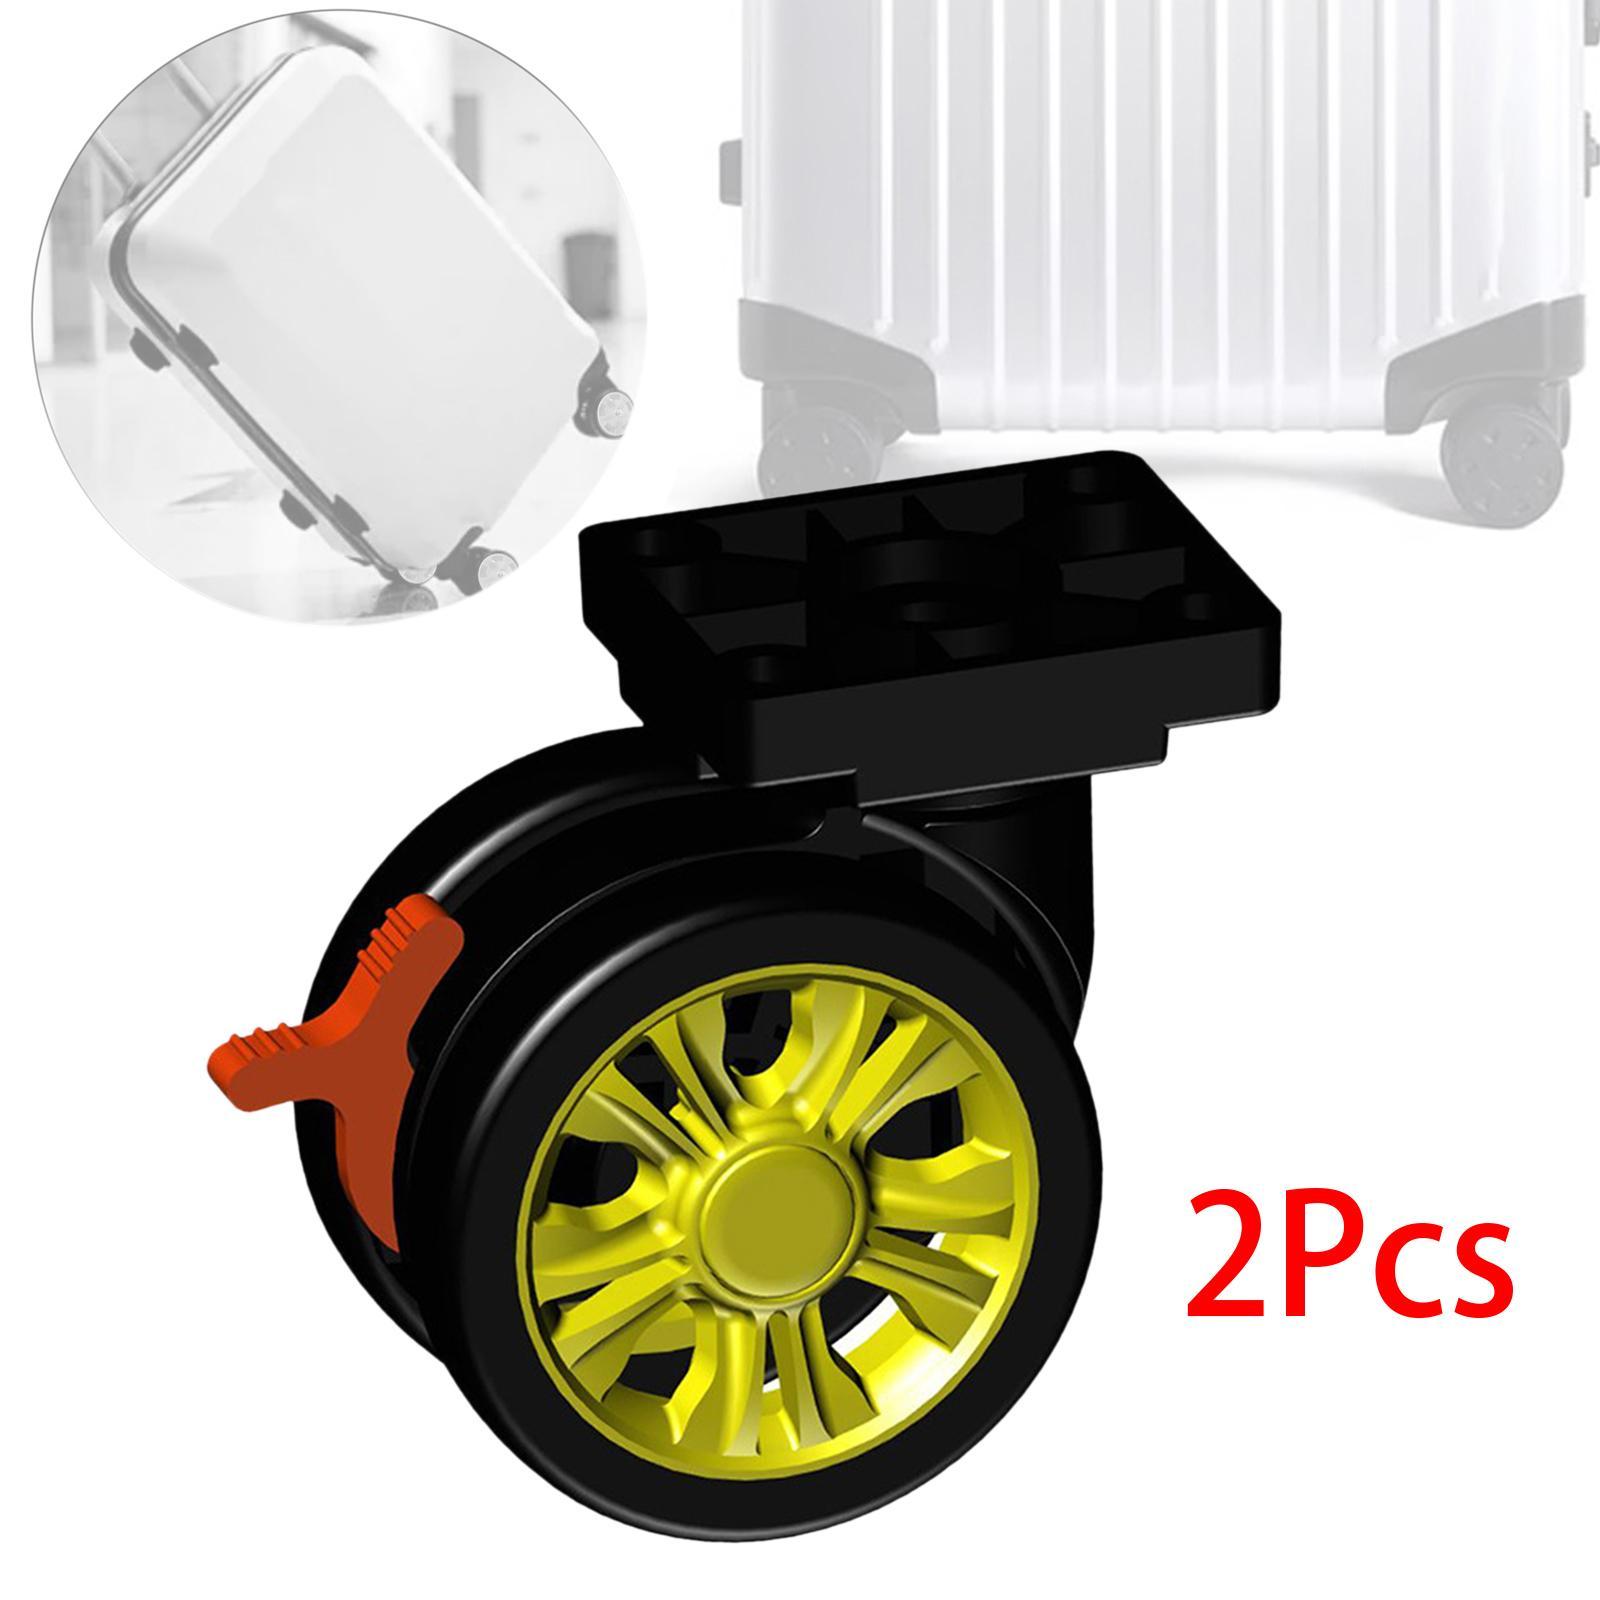 2x Luggage Suitcase Replacement Wheels with Brake Durable for Suitcase